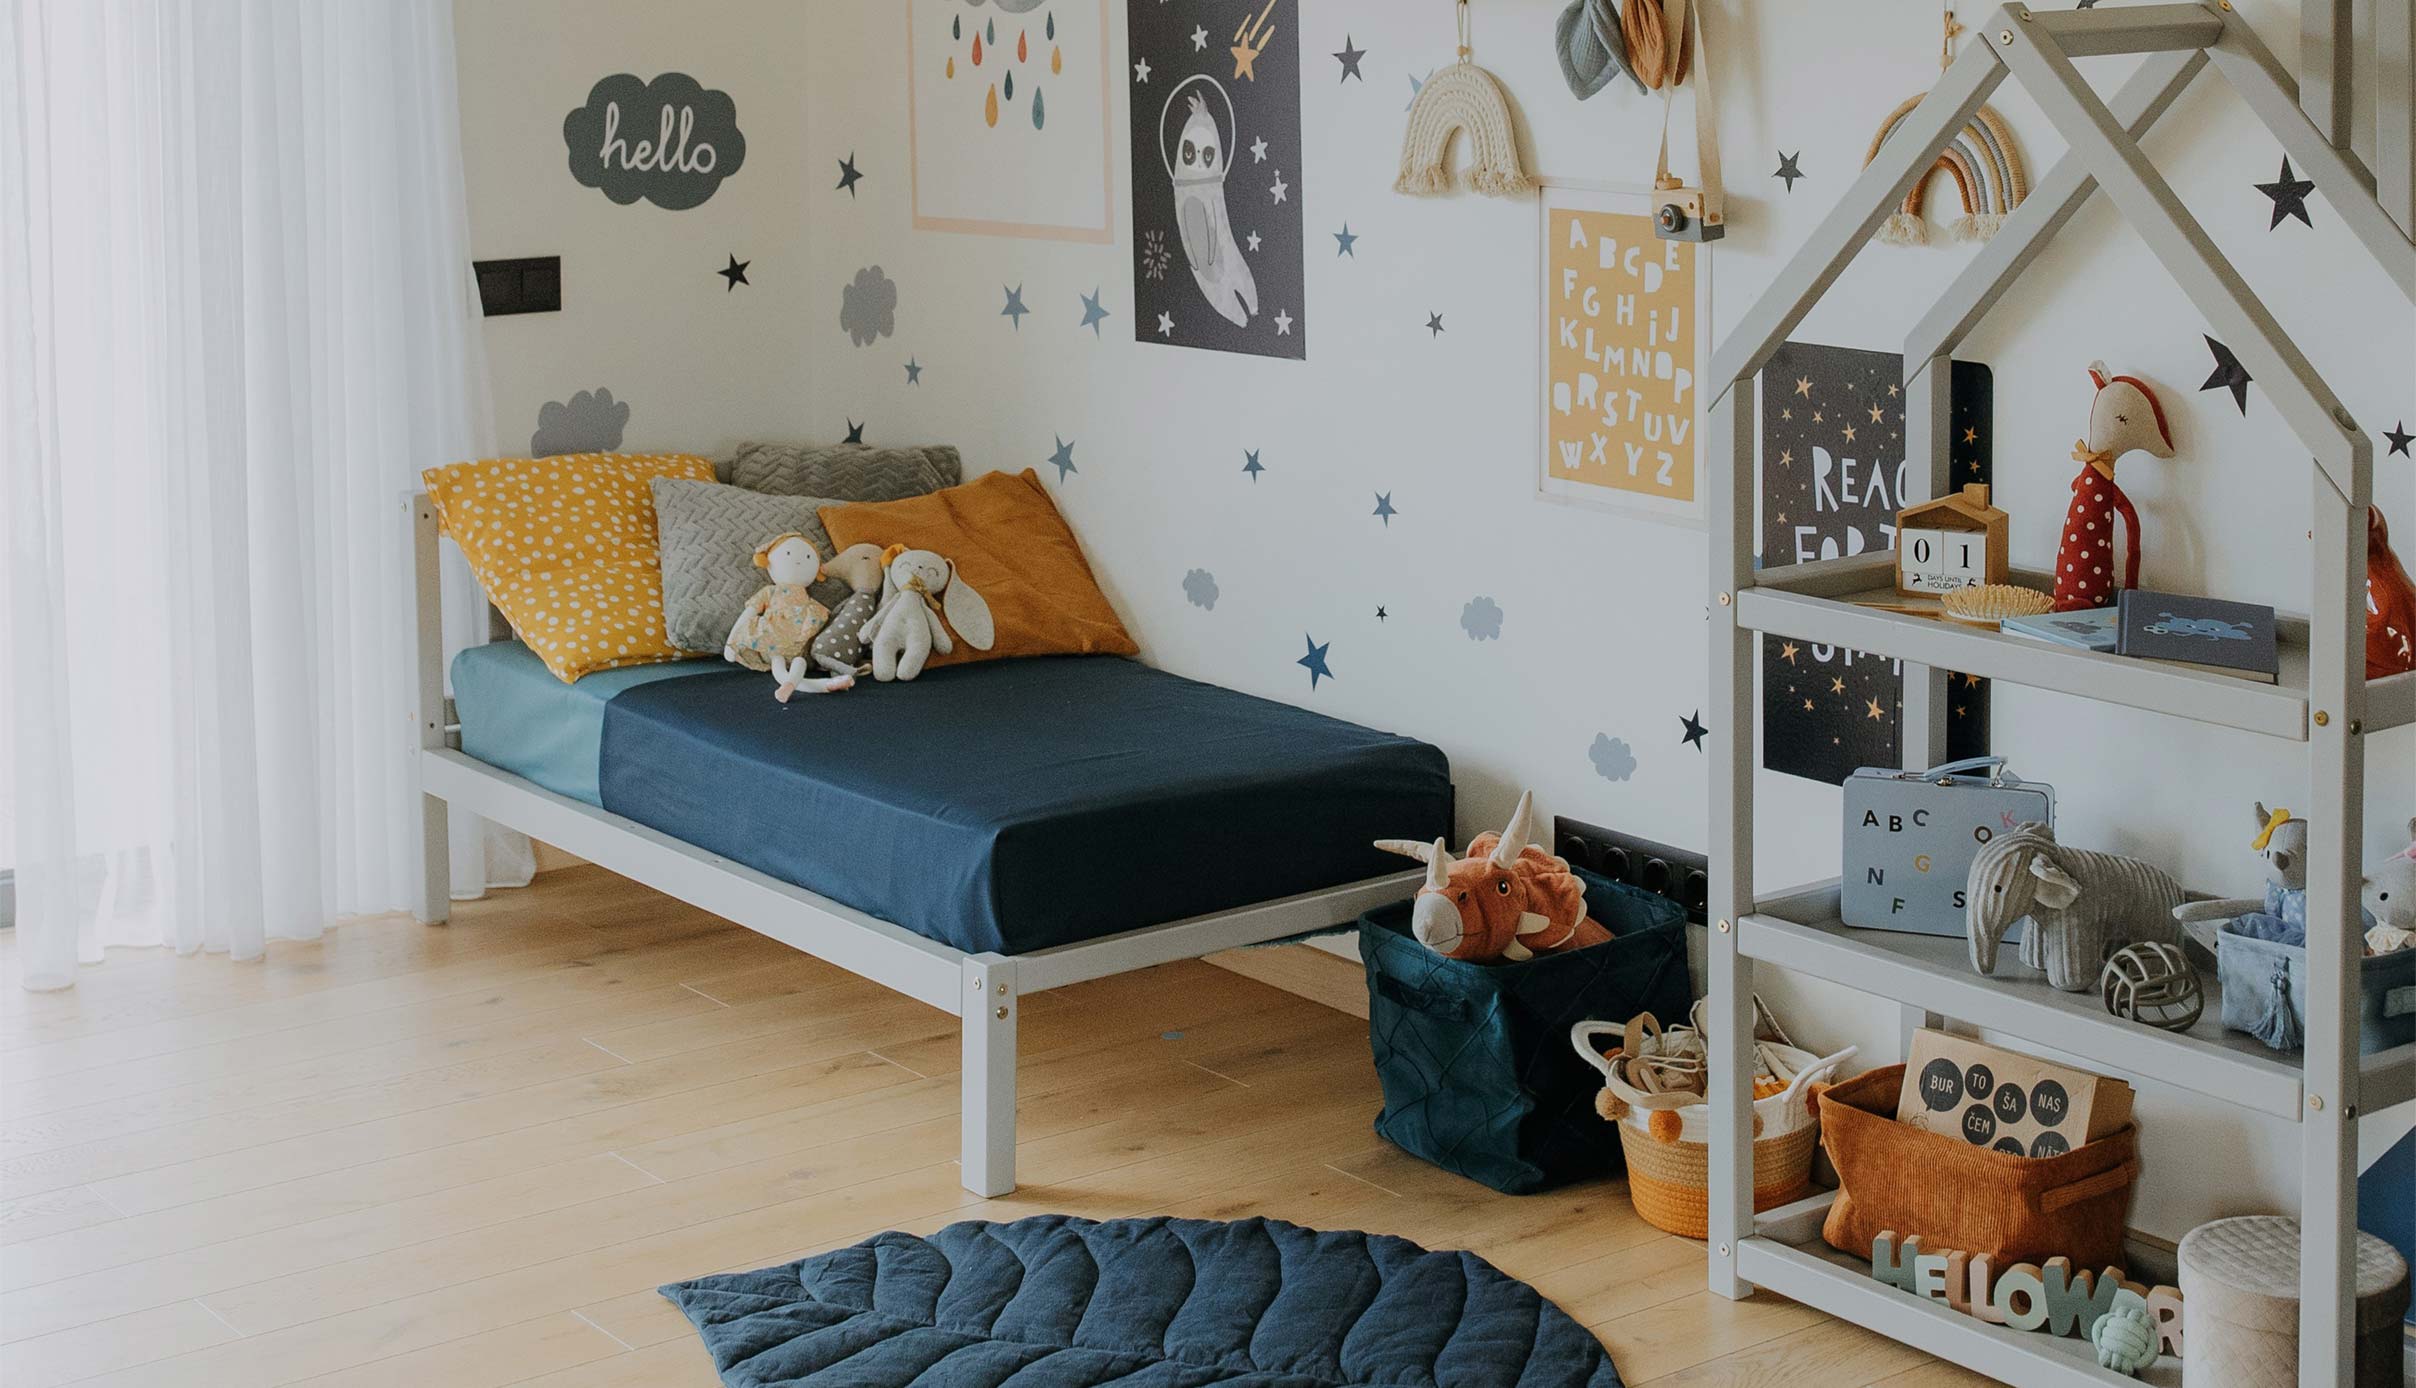 A child's room with a bed, a bedside table, and a rug.